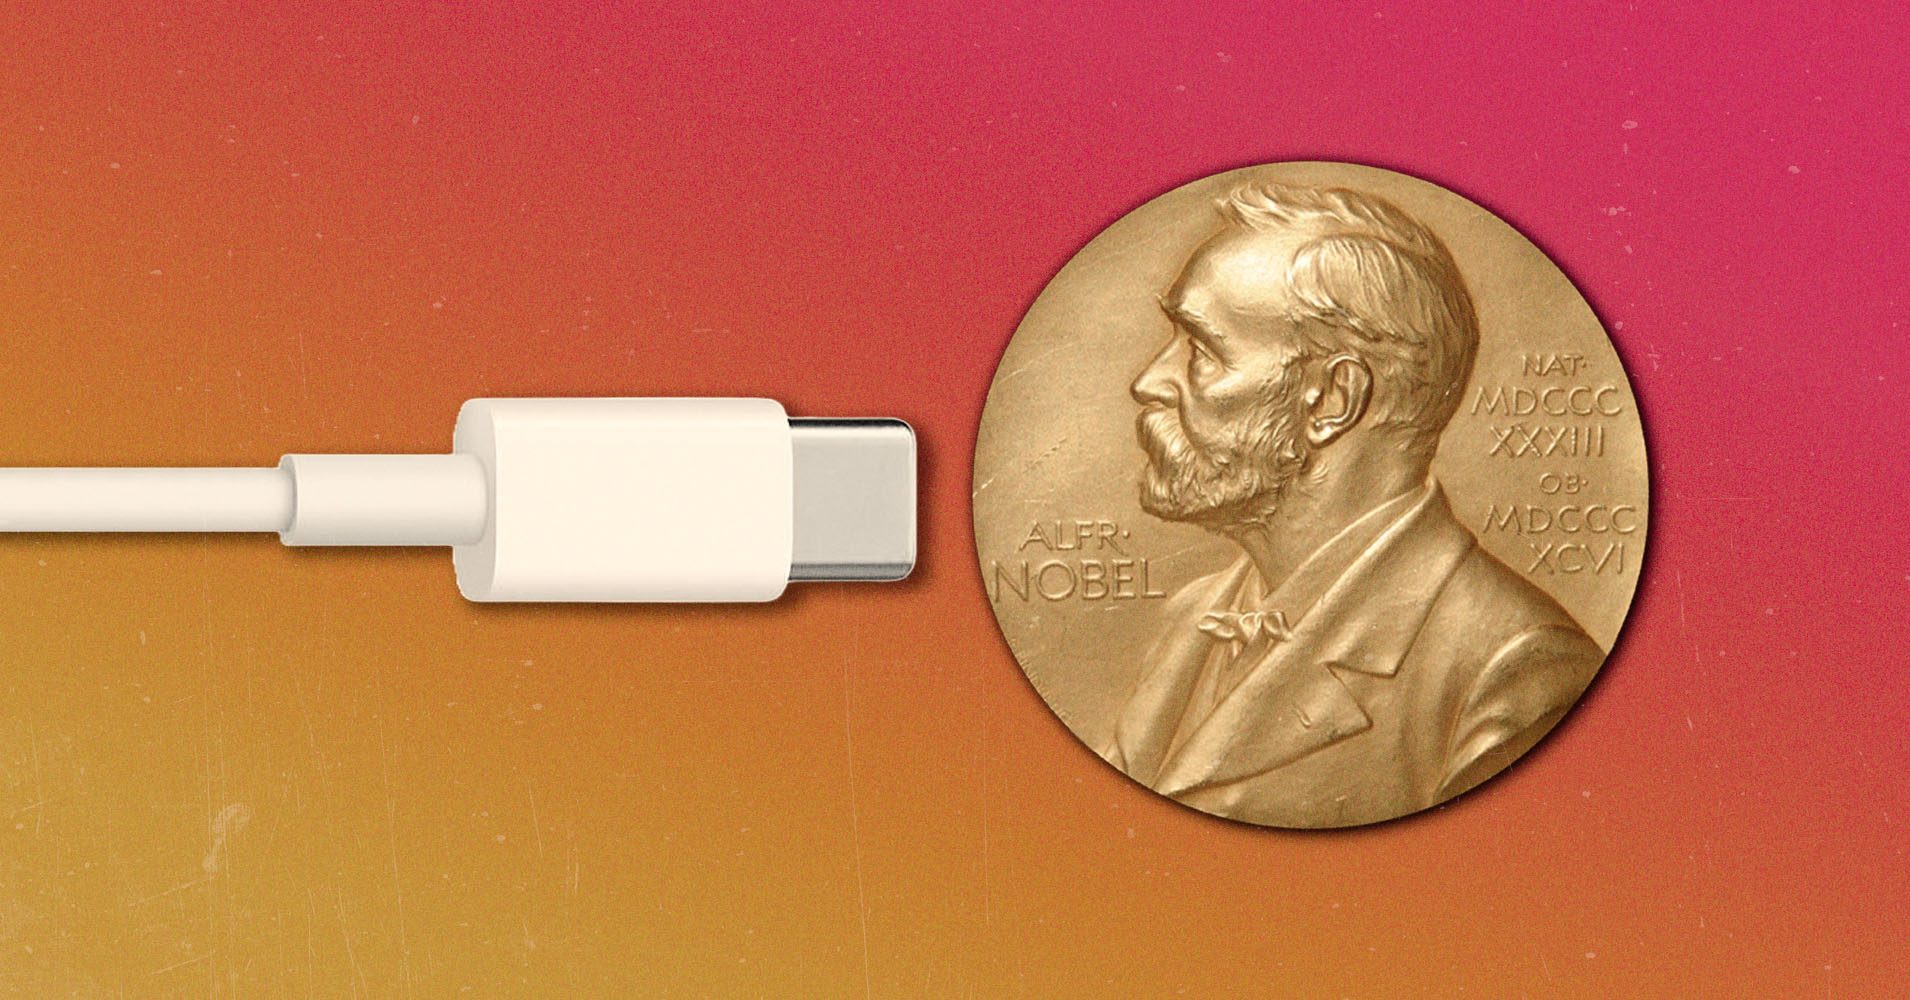 A USB-C cable next to a Nobel Prize medal